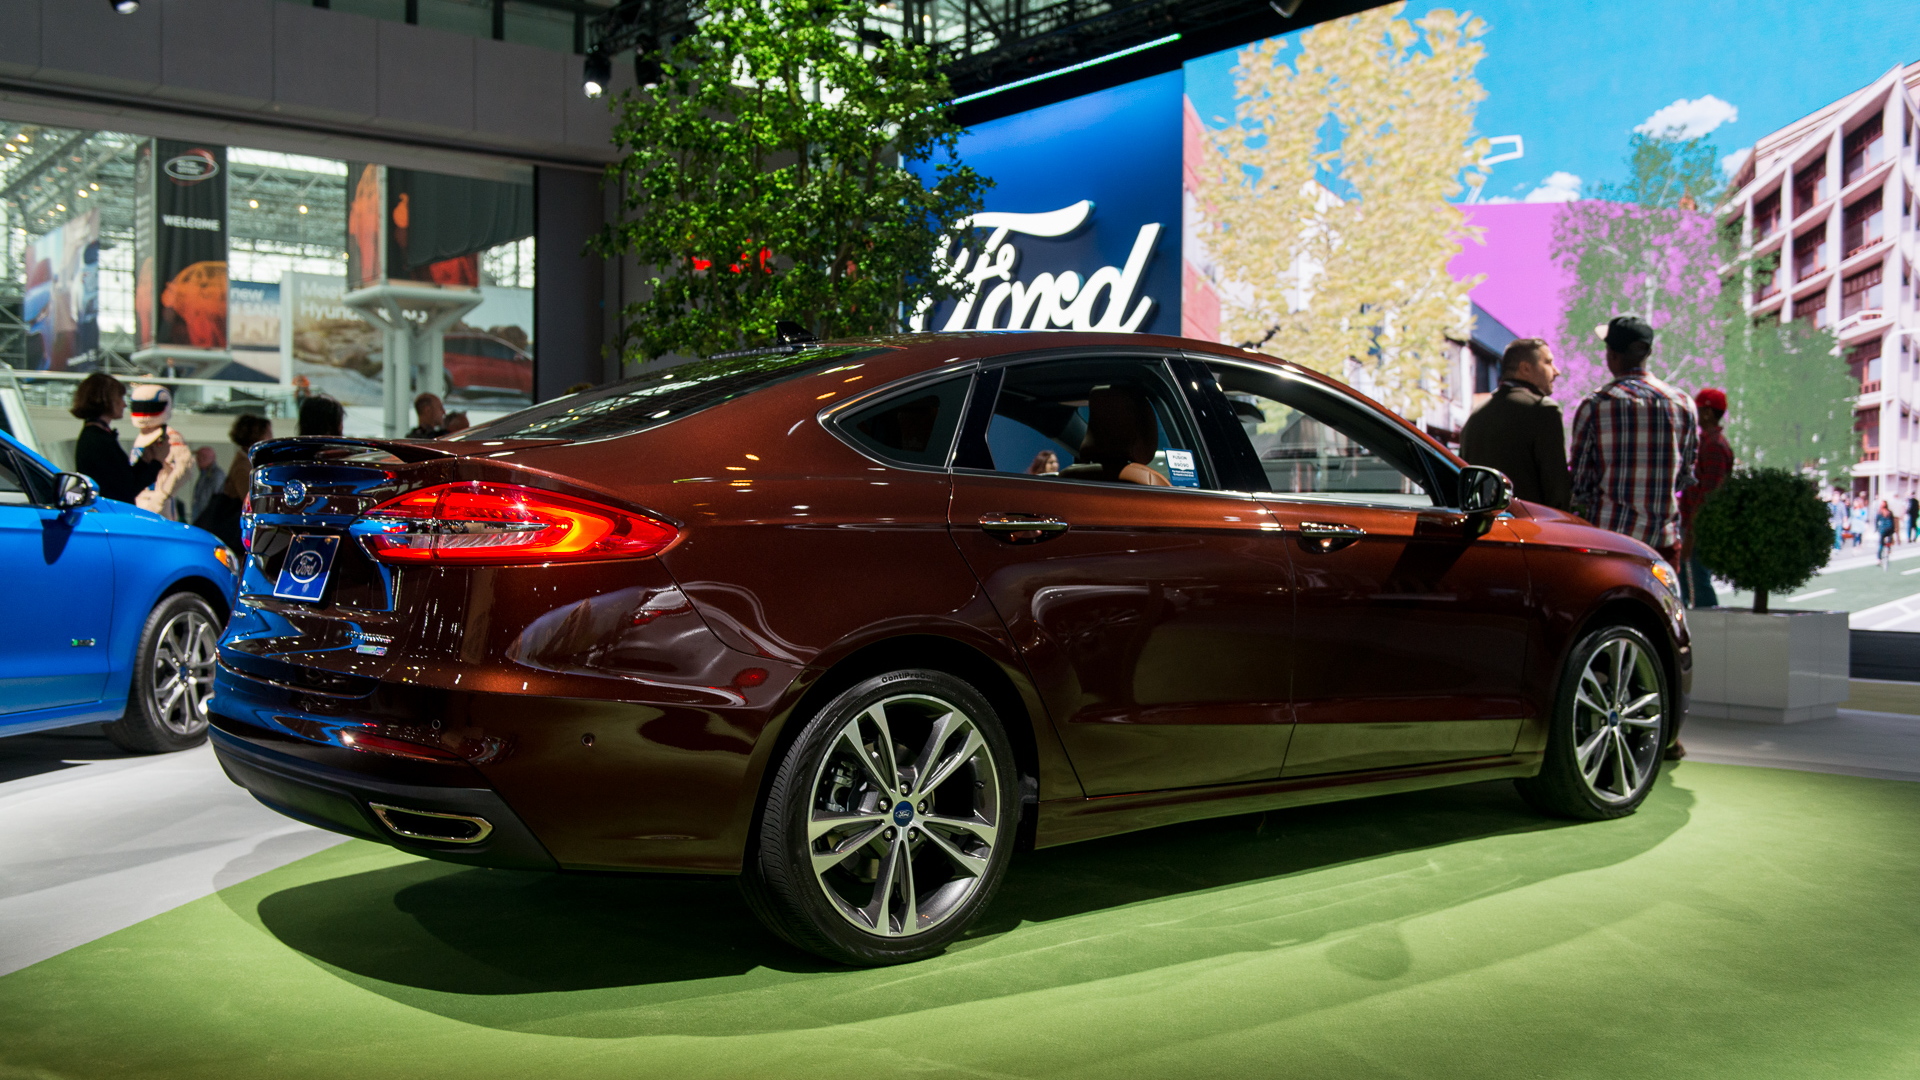 2019 Ford Fusion, 2018 New York auto show